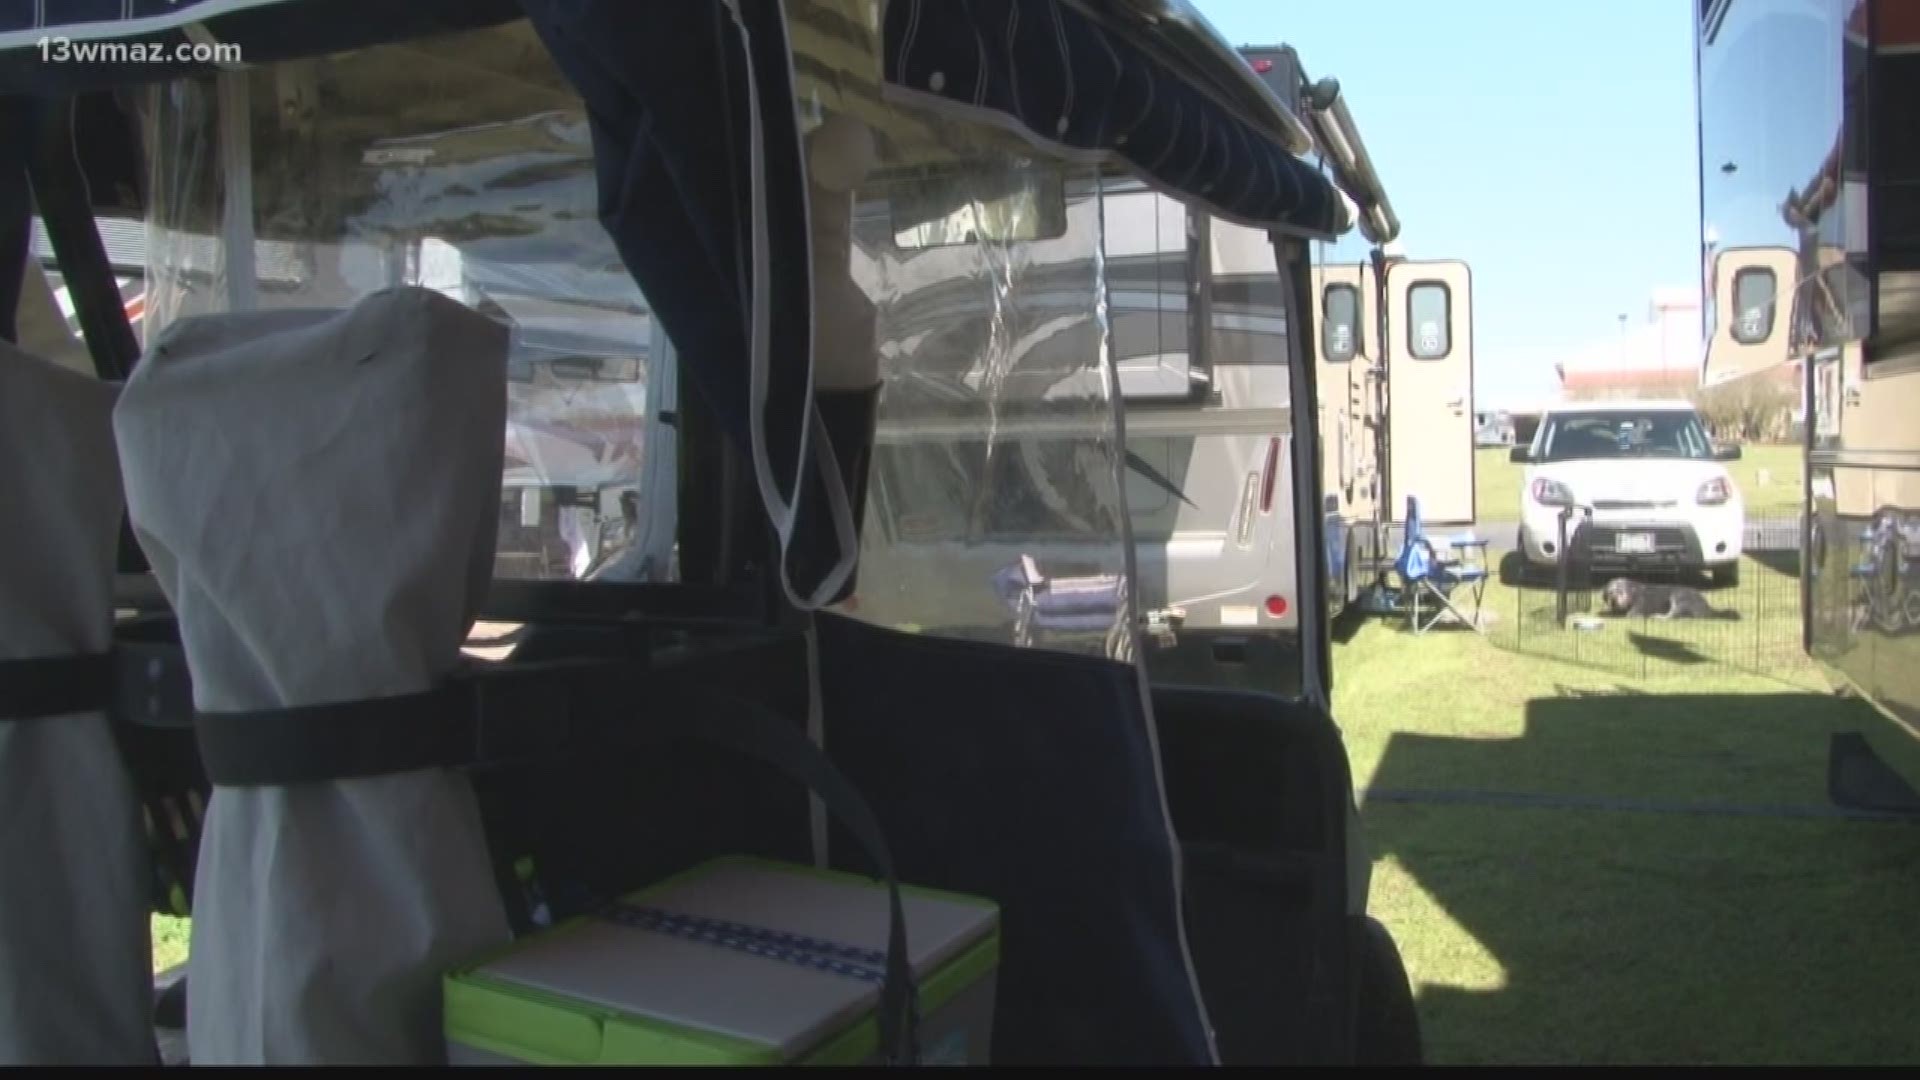 They share a mobile lifestyle, but for the next few days, hundreds of families are calling the Georgia National Fairgrounds in Perry home for the Family Motor Coach Association Convention.